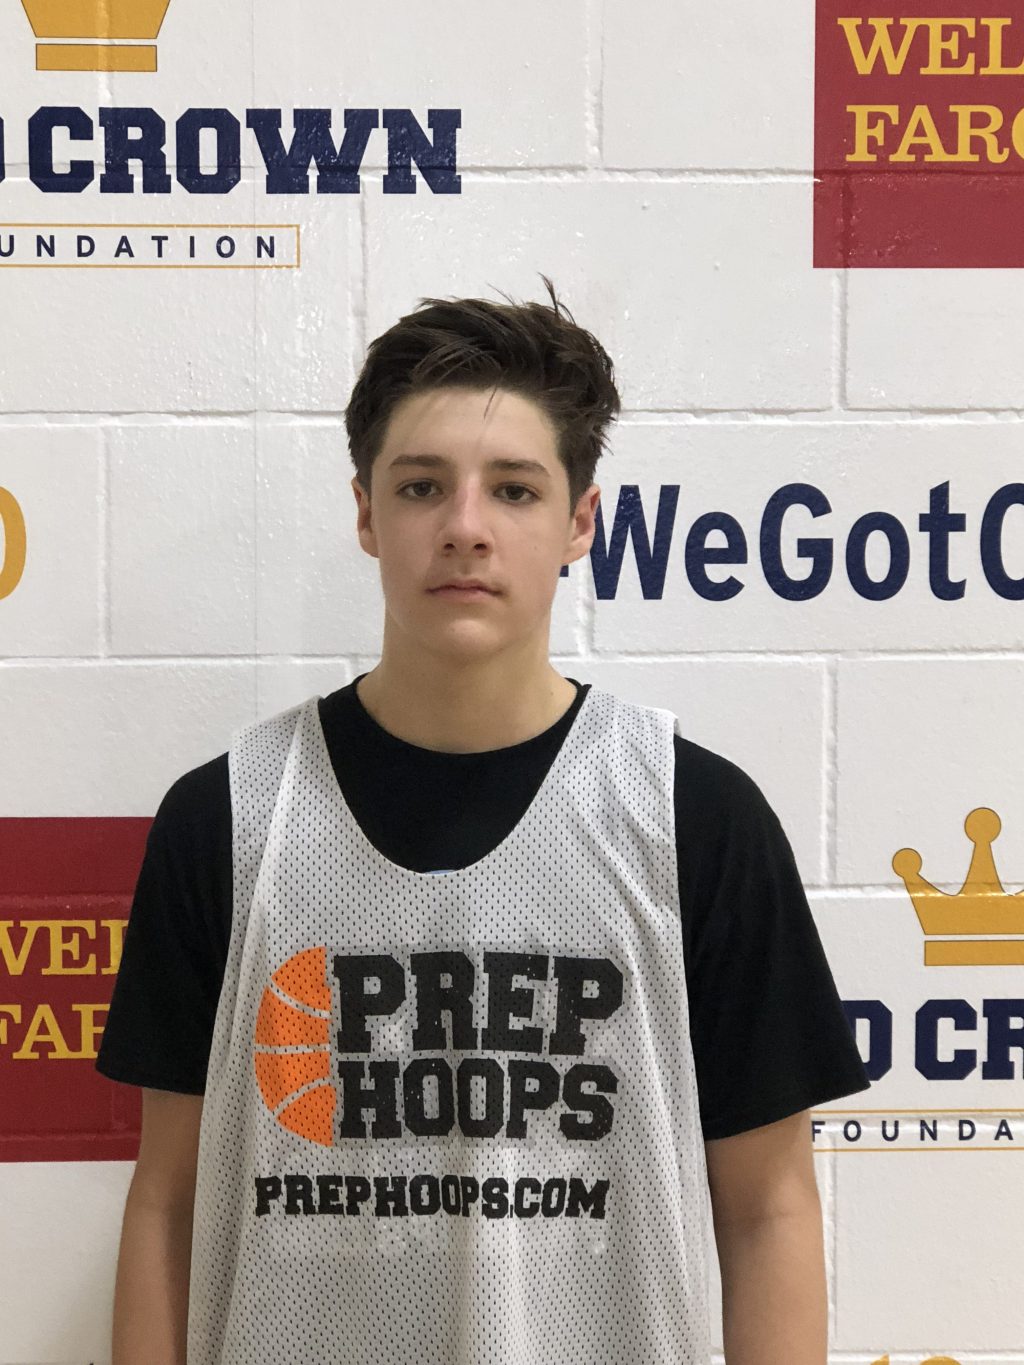 2021 Rankings Update: Stock Boosters Throughout the Year